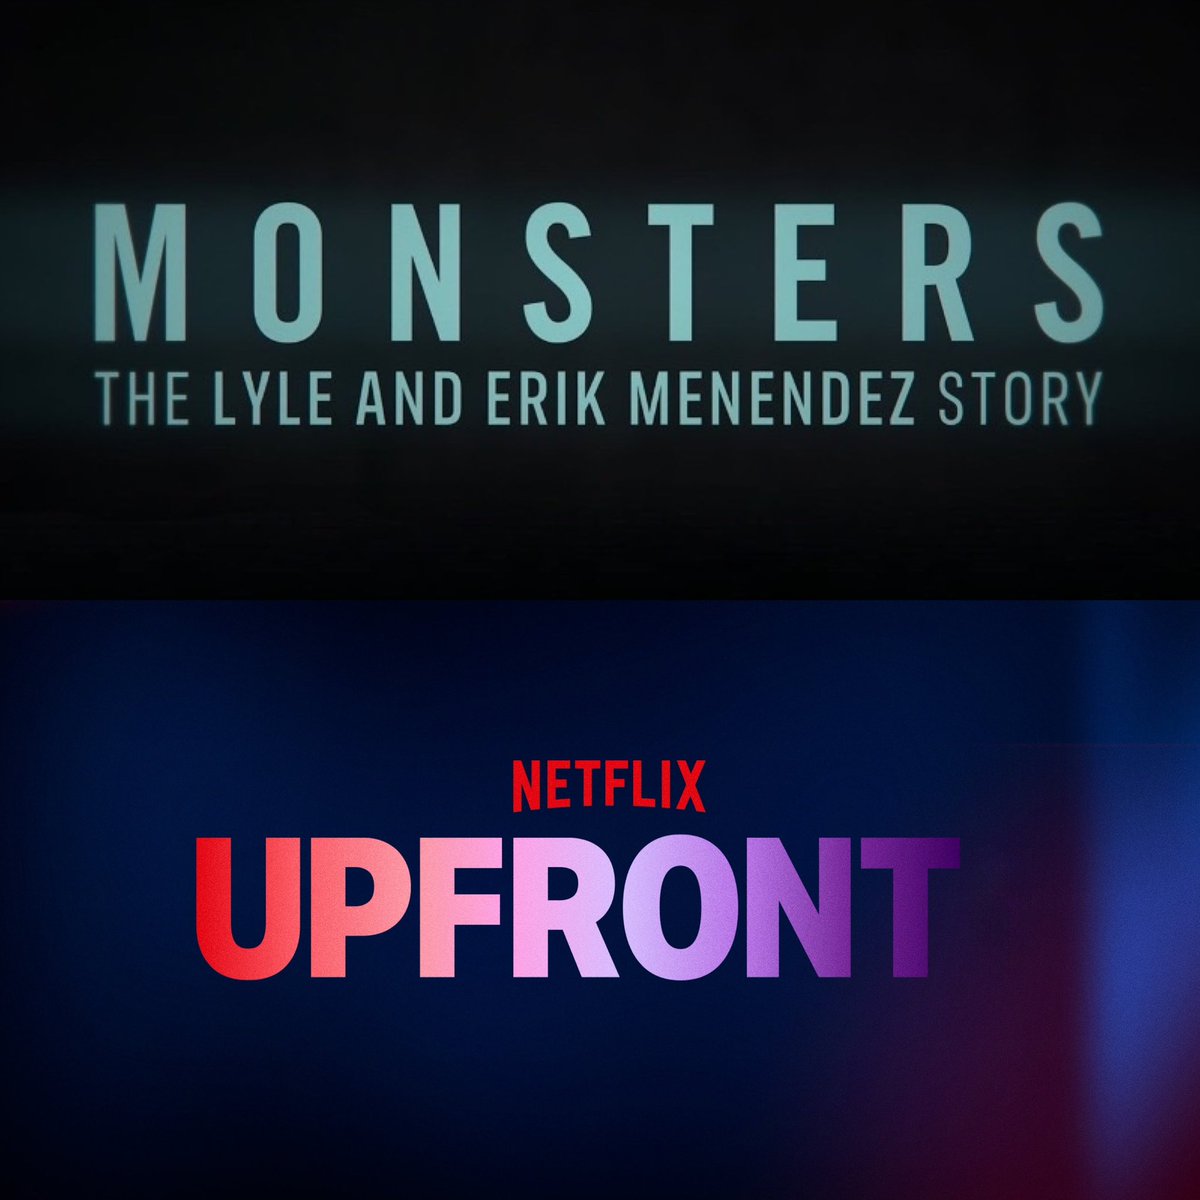 Netflix has announced that it will preview Ryan Murphy’s “Monsters: The Lyle and Erik Menéndez Story” for advertisers during its upfront presentation on May 15.